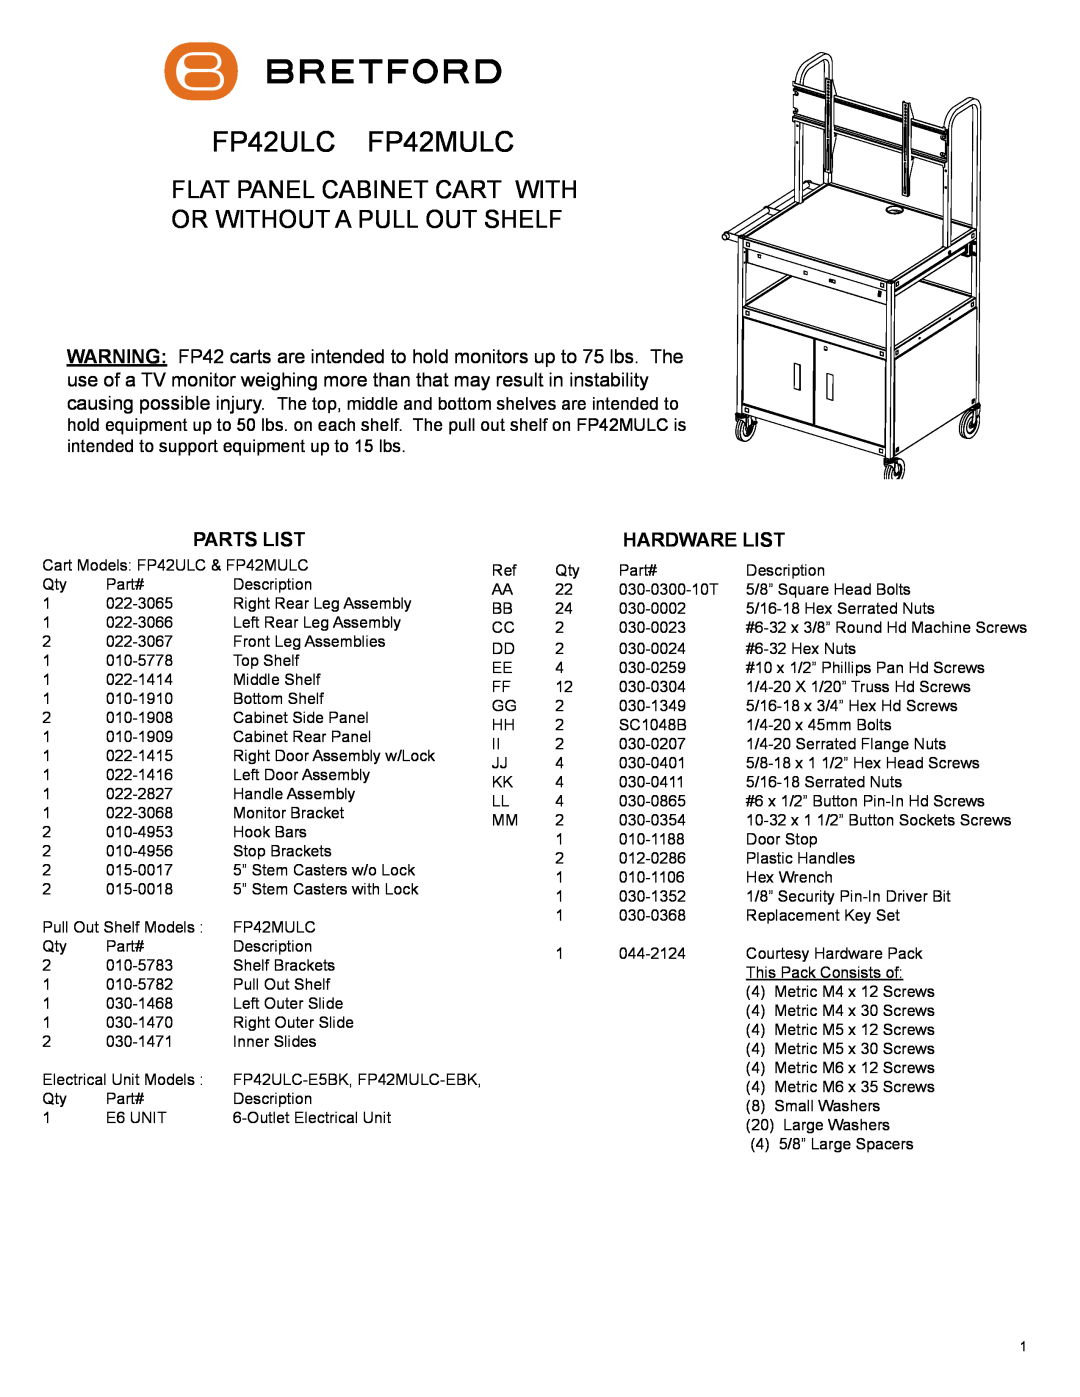 Bretford manual Parts List, Hardware List, FP42ULC FP42MULC, Flat Panel Cabinet Cart With Or Without A Pull Out Shelf 